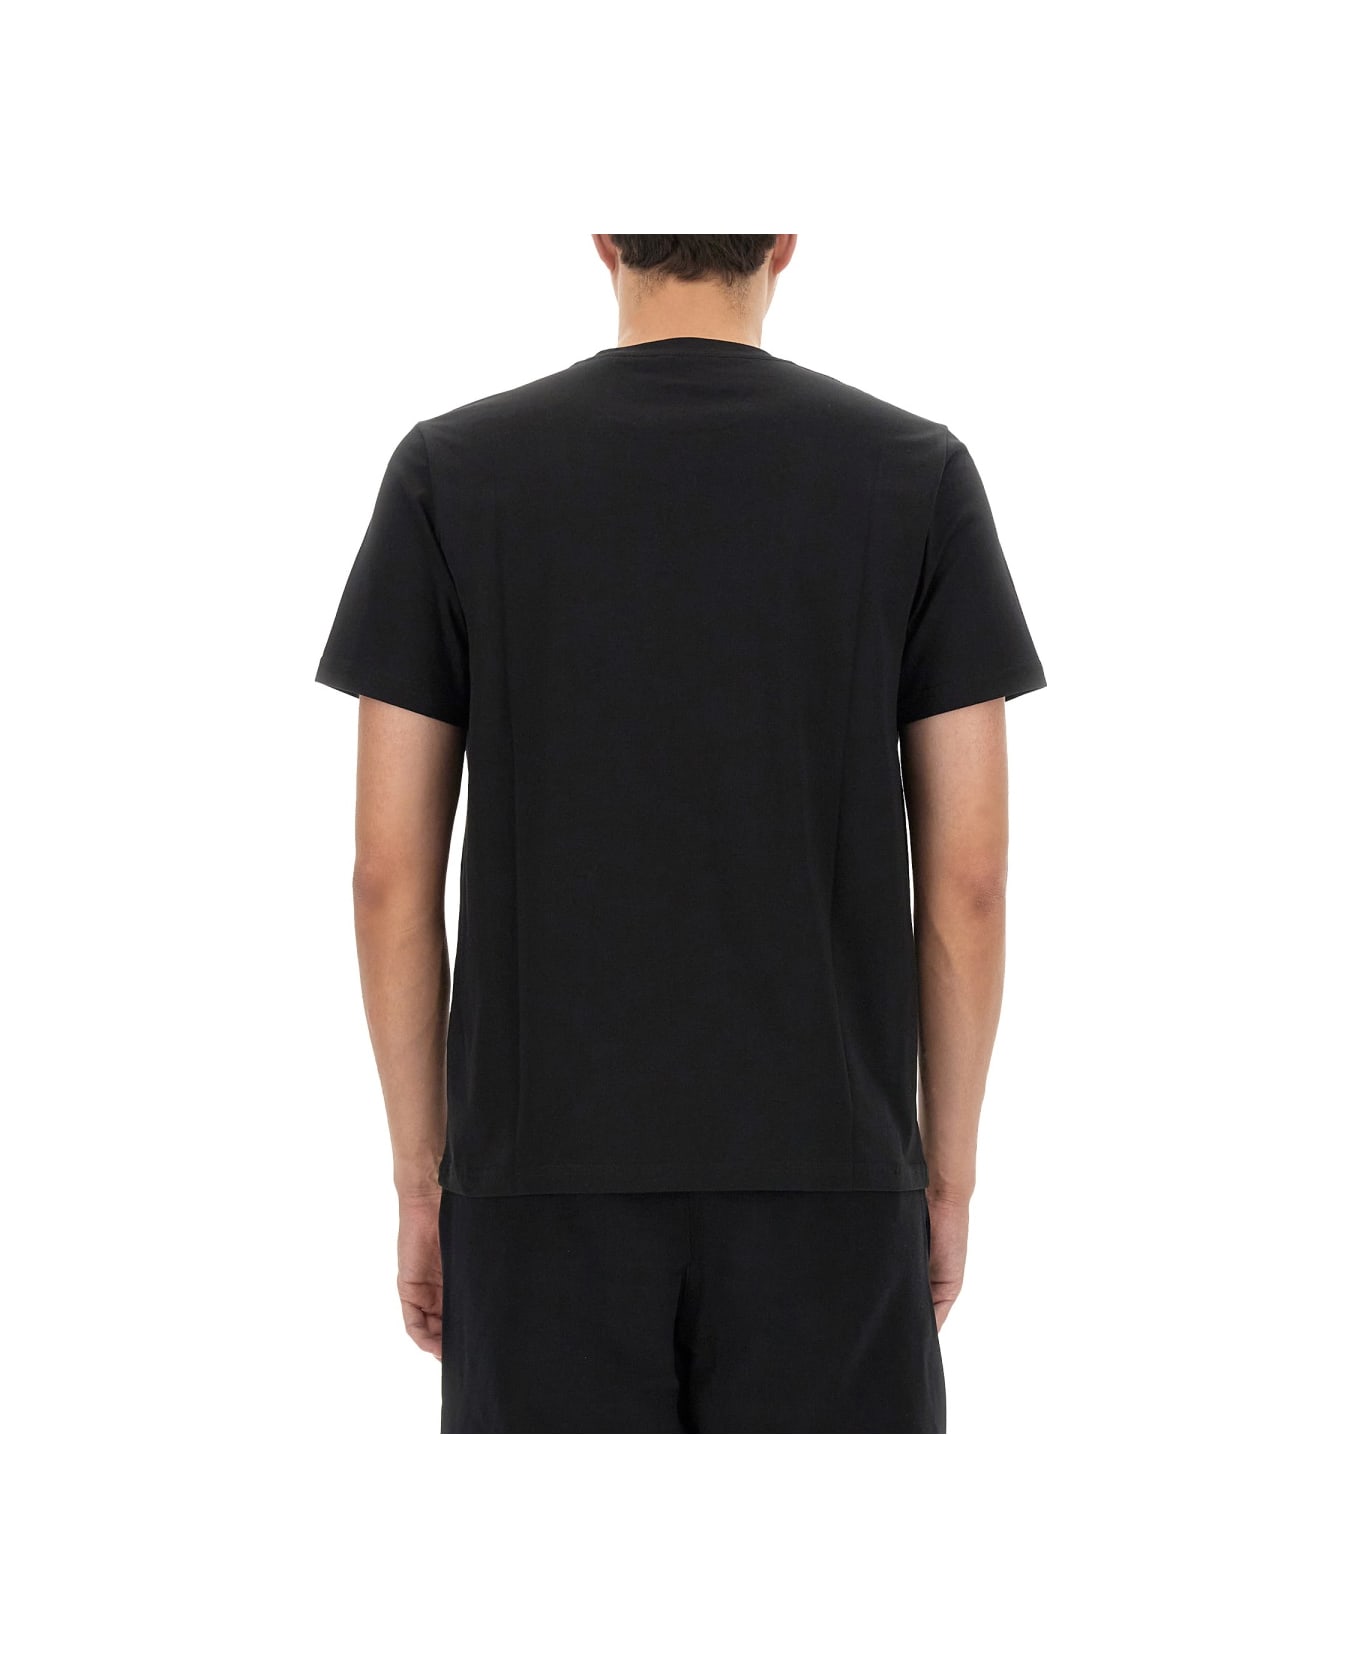 PS by Paul Smith Cyclist Print T-shirt - BLACK シャツ